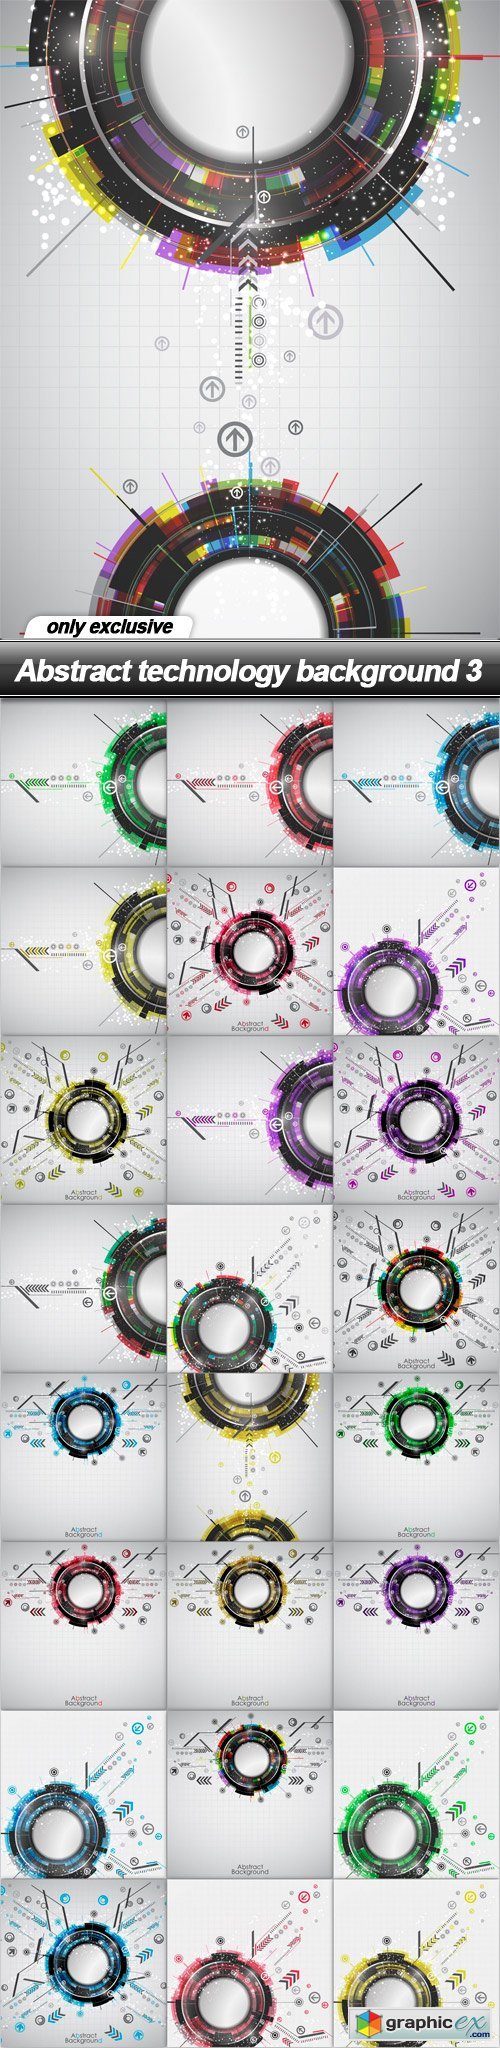 Abstract technology background 3 - 25 EPS